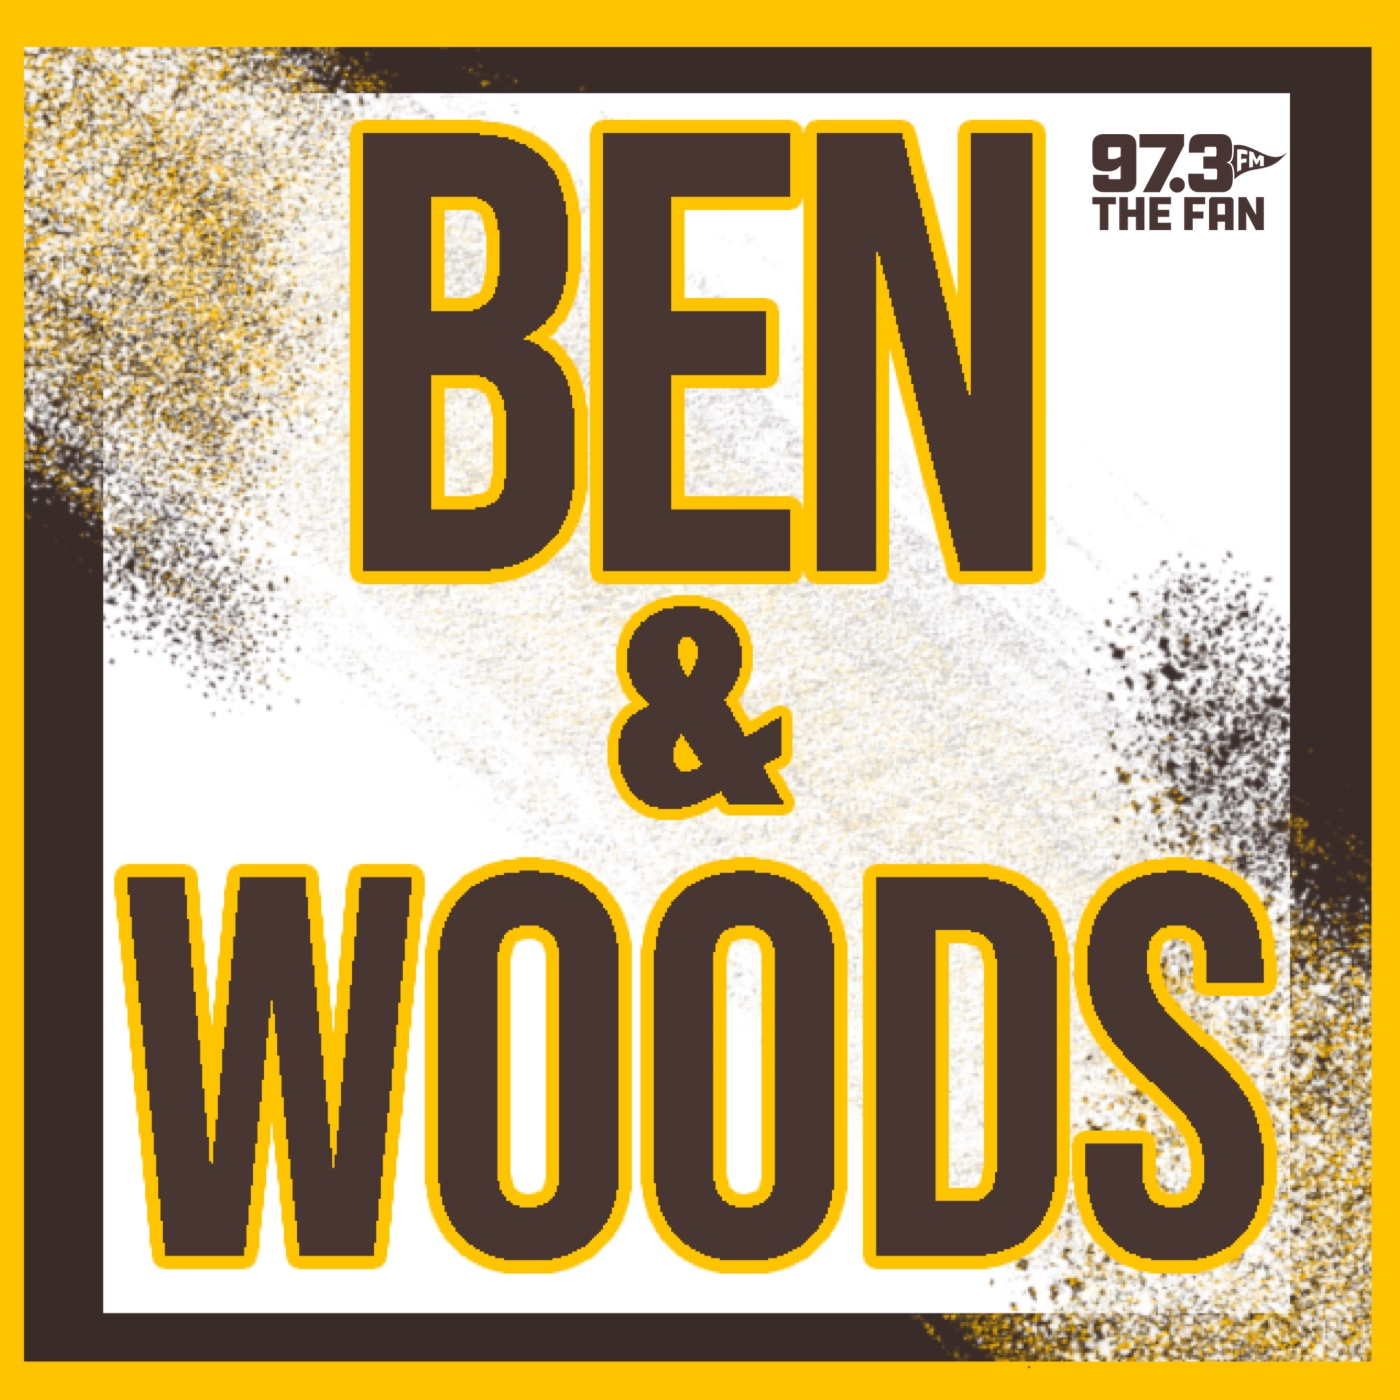 9am Hour - Mike Shildt, Weekend Plans, + Things Ben Likes!